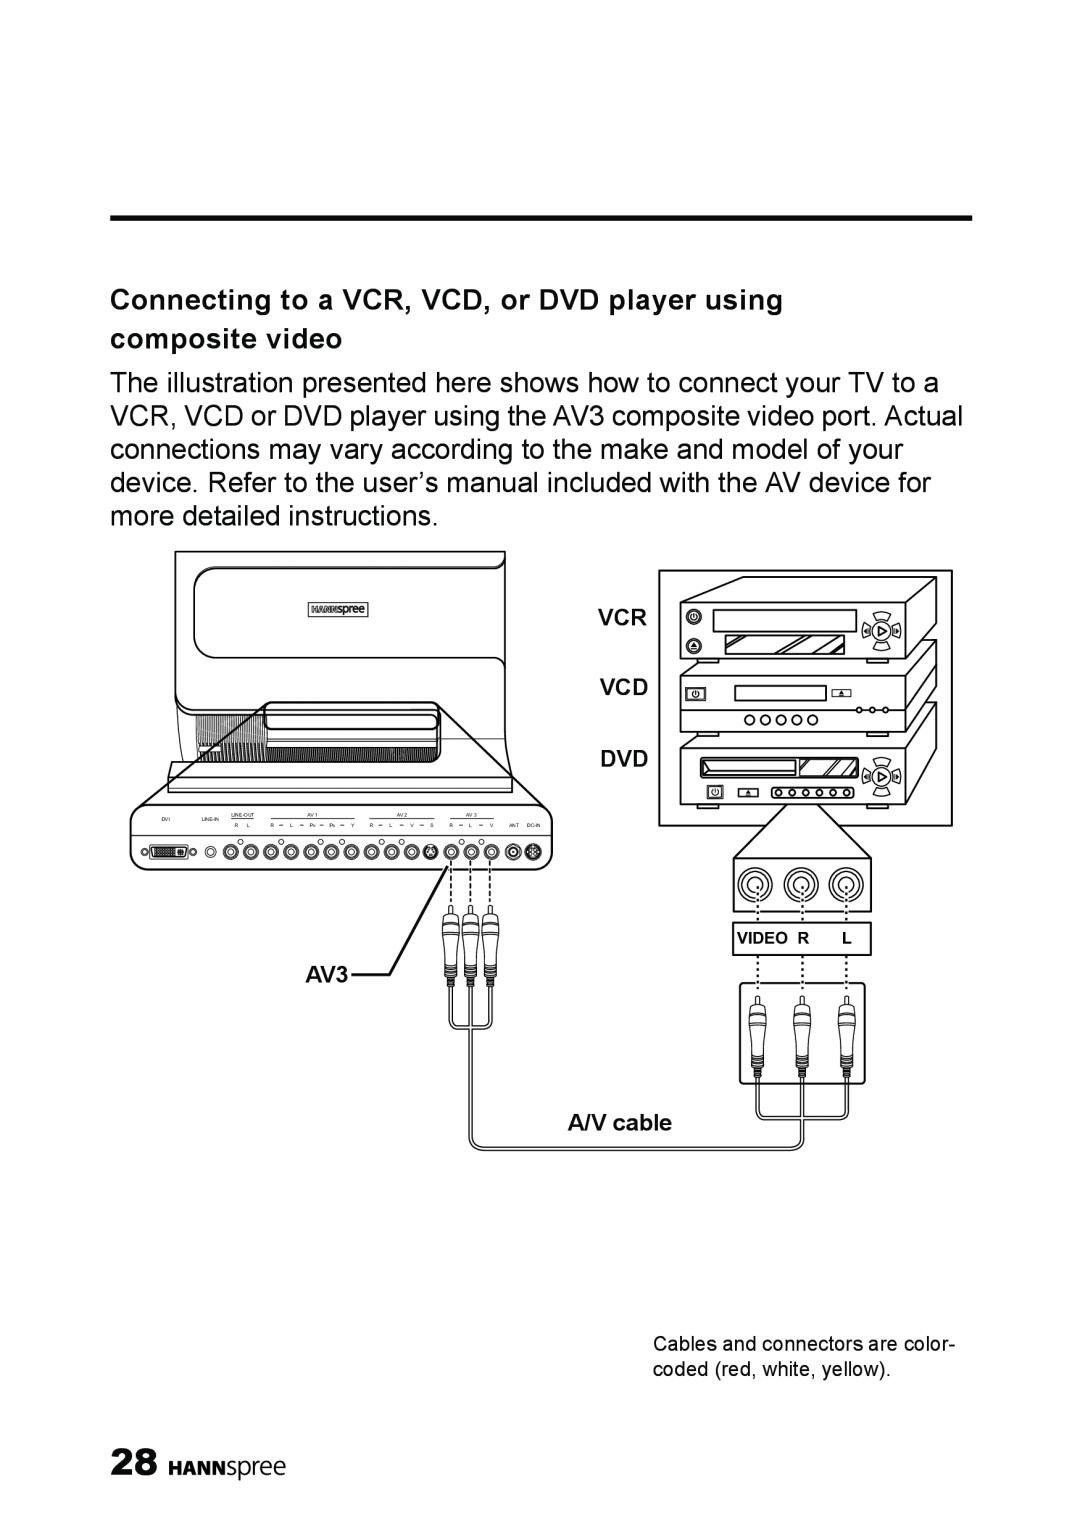 HANNspree LT11-23A1 user manual Connecting to a VCR, VCD, or DVD player using composite video, Video R L 